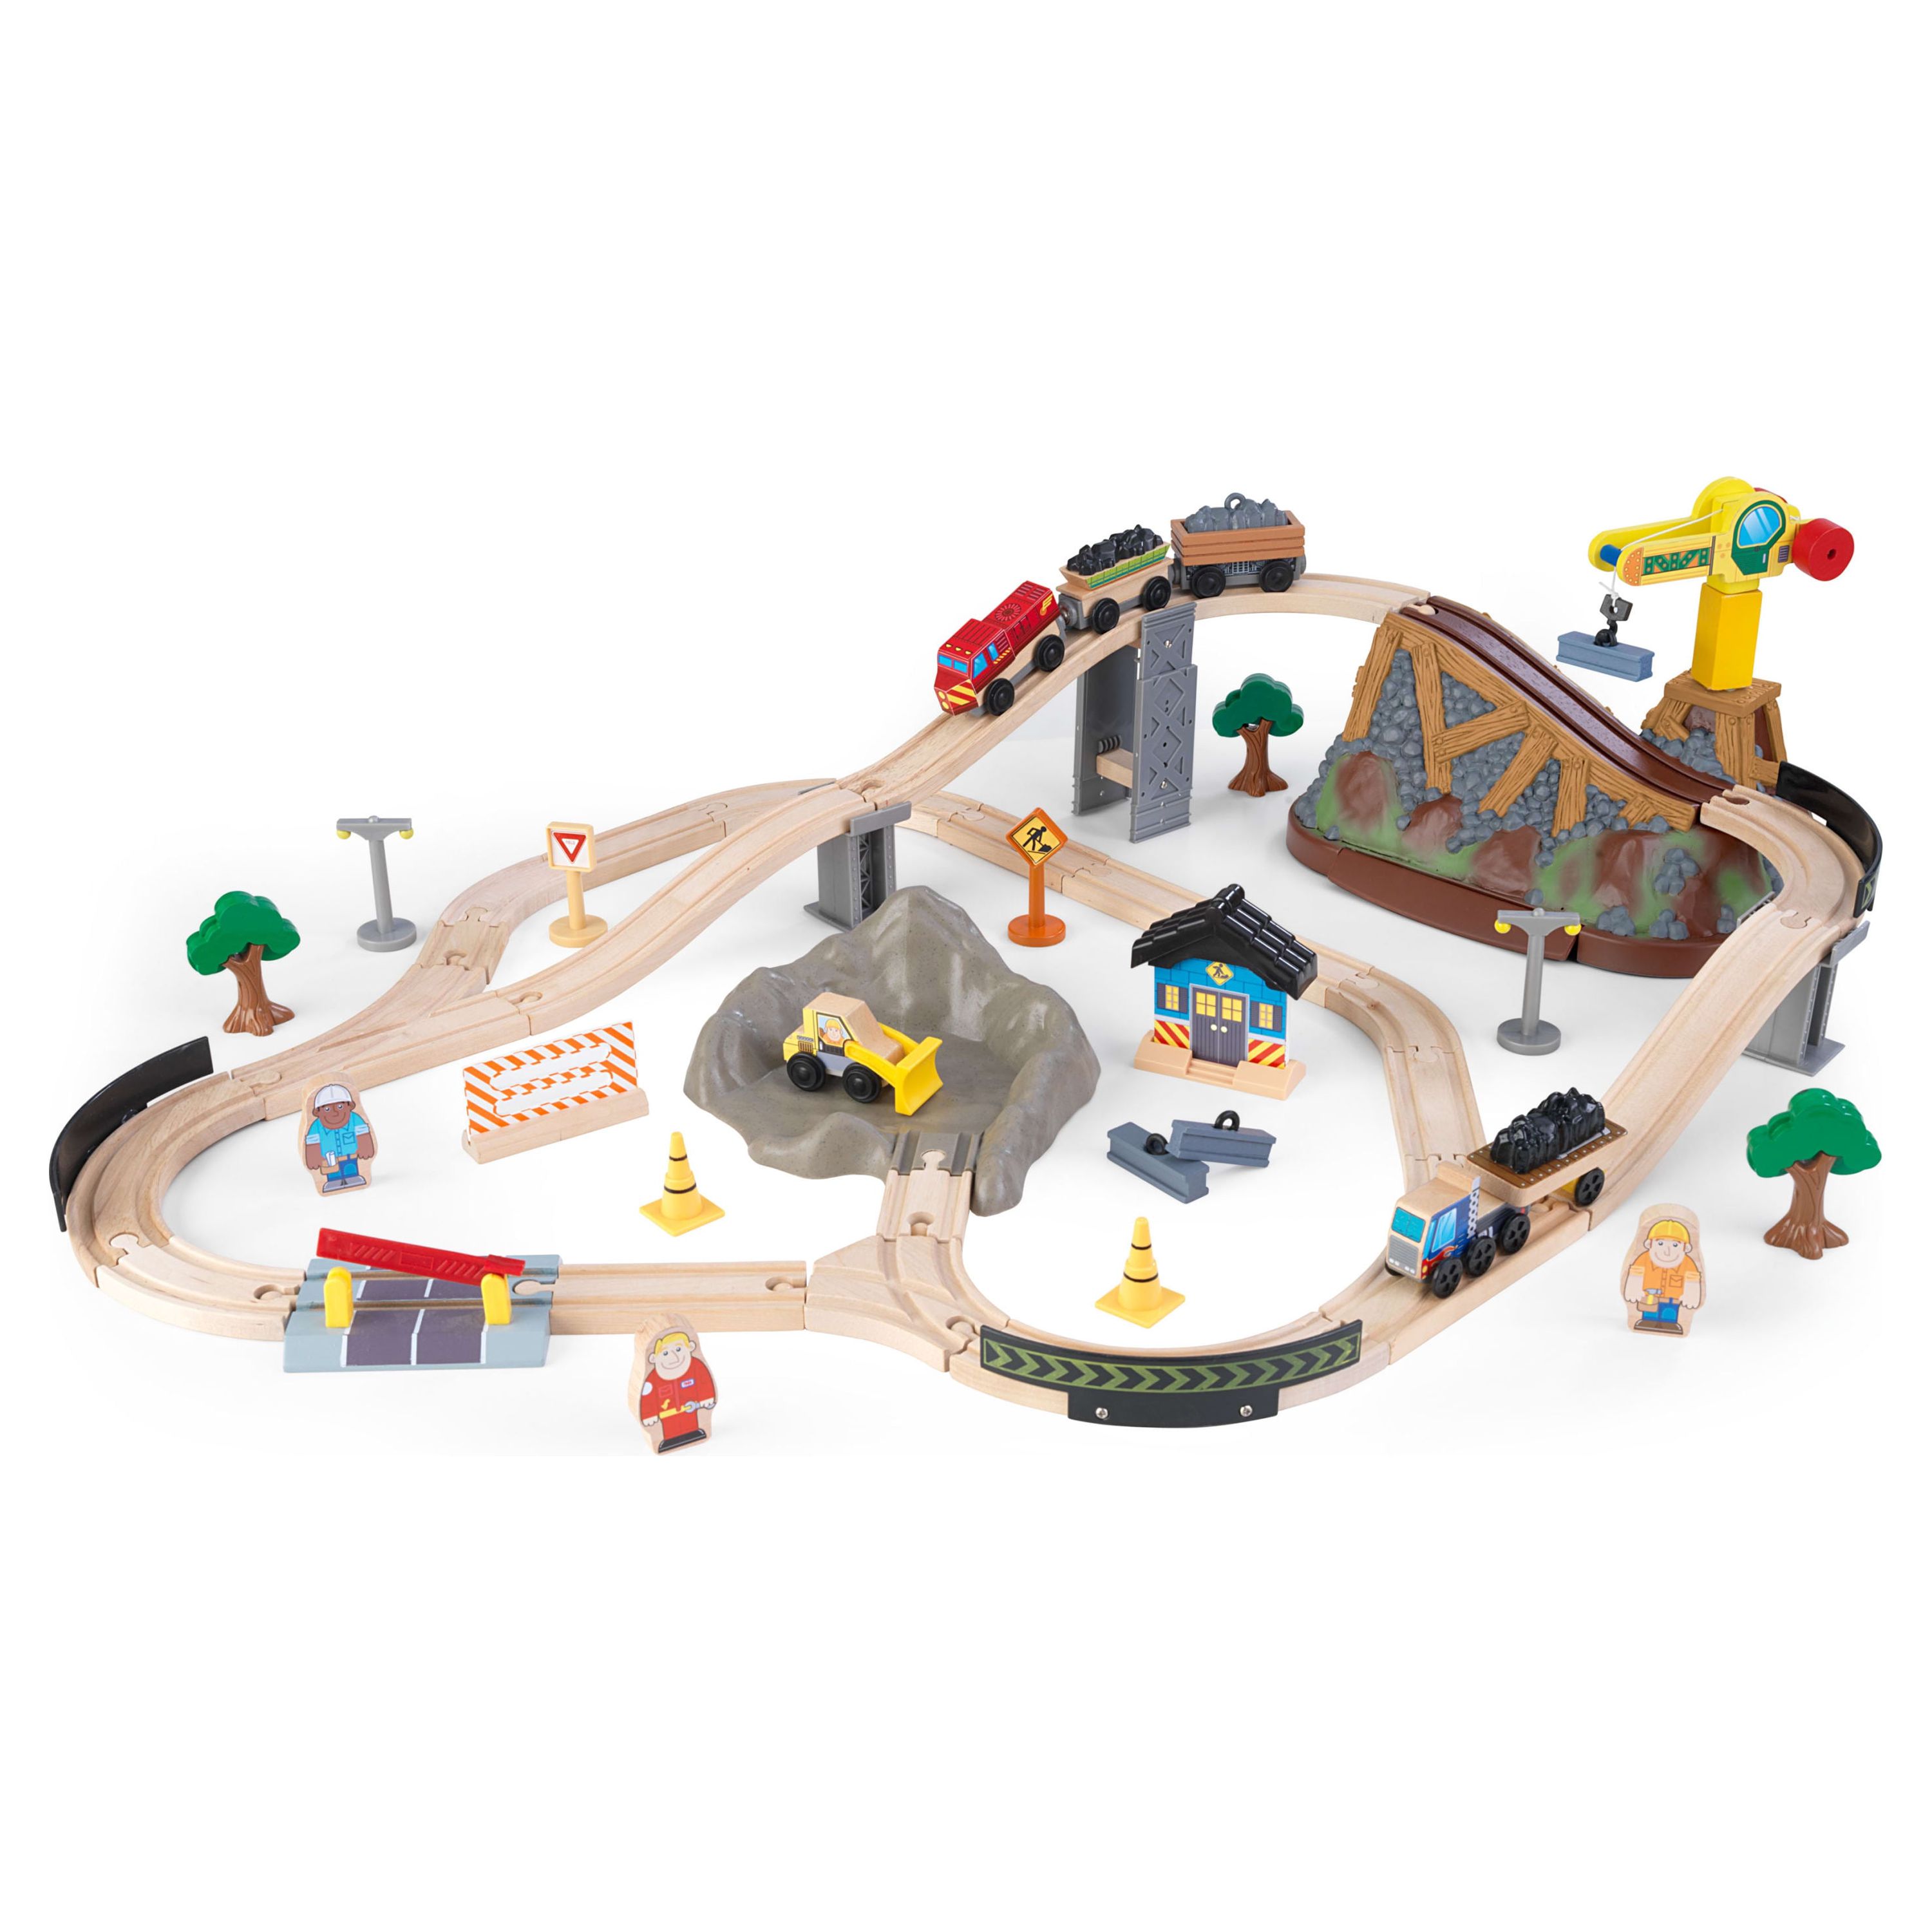 KidKraft Bucket Top Construction Wood Train Set with Crane & 61 Pieces, For Ages 3+ - image 1 of 7